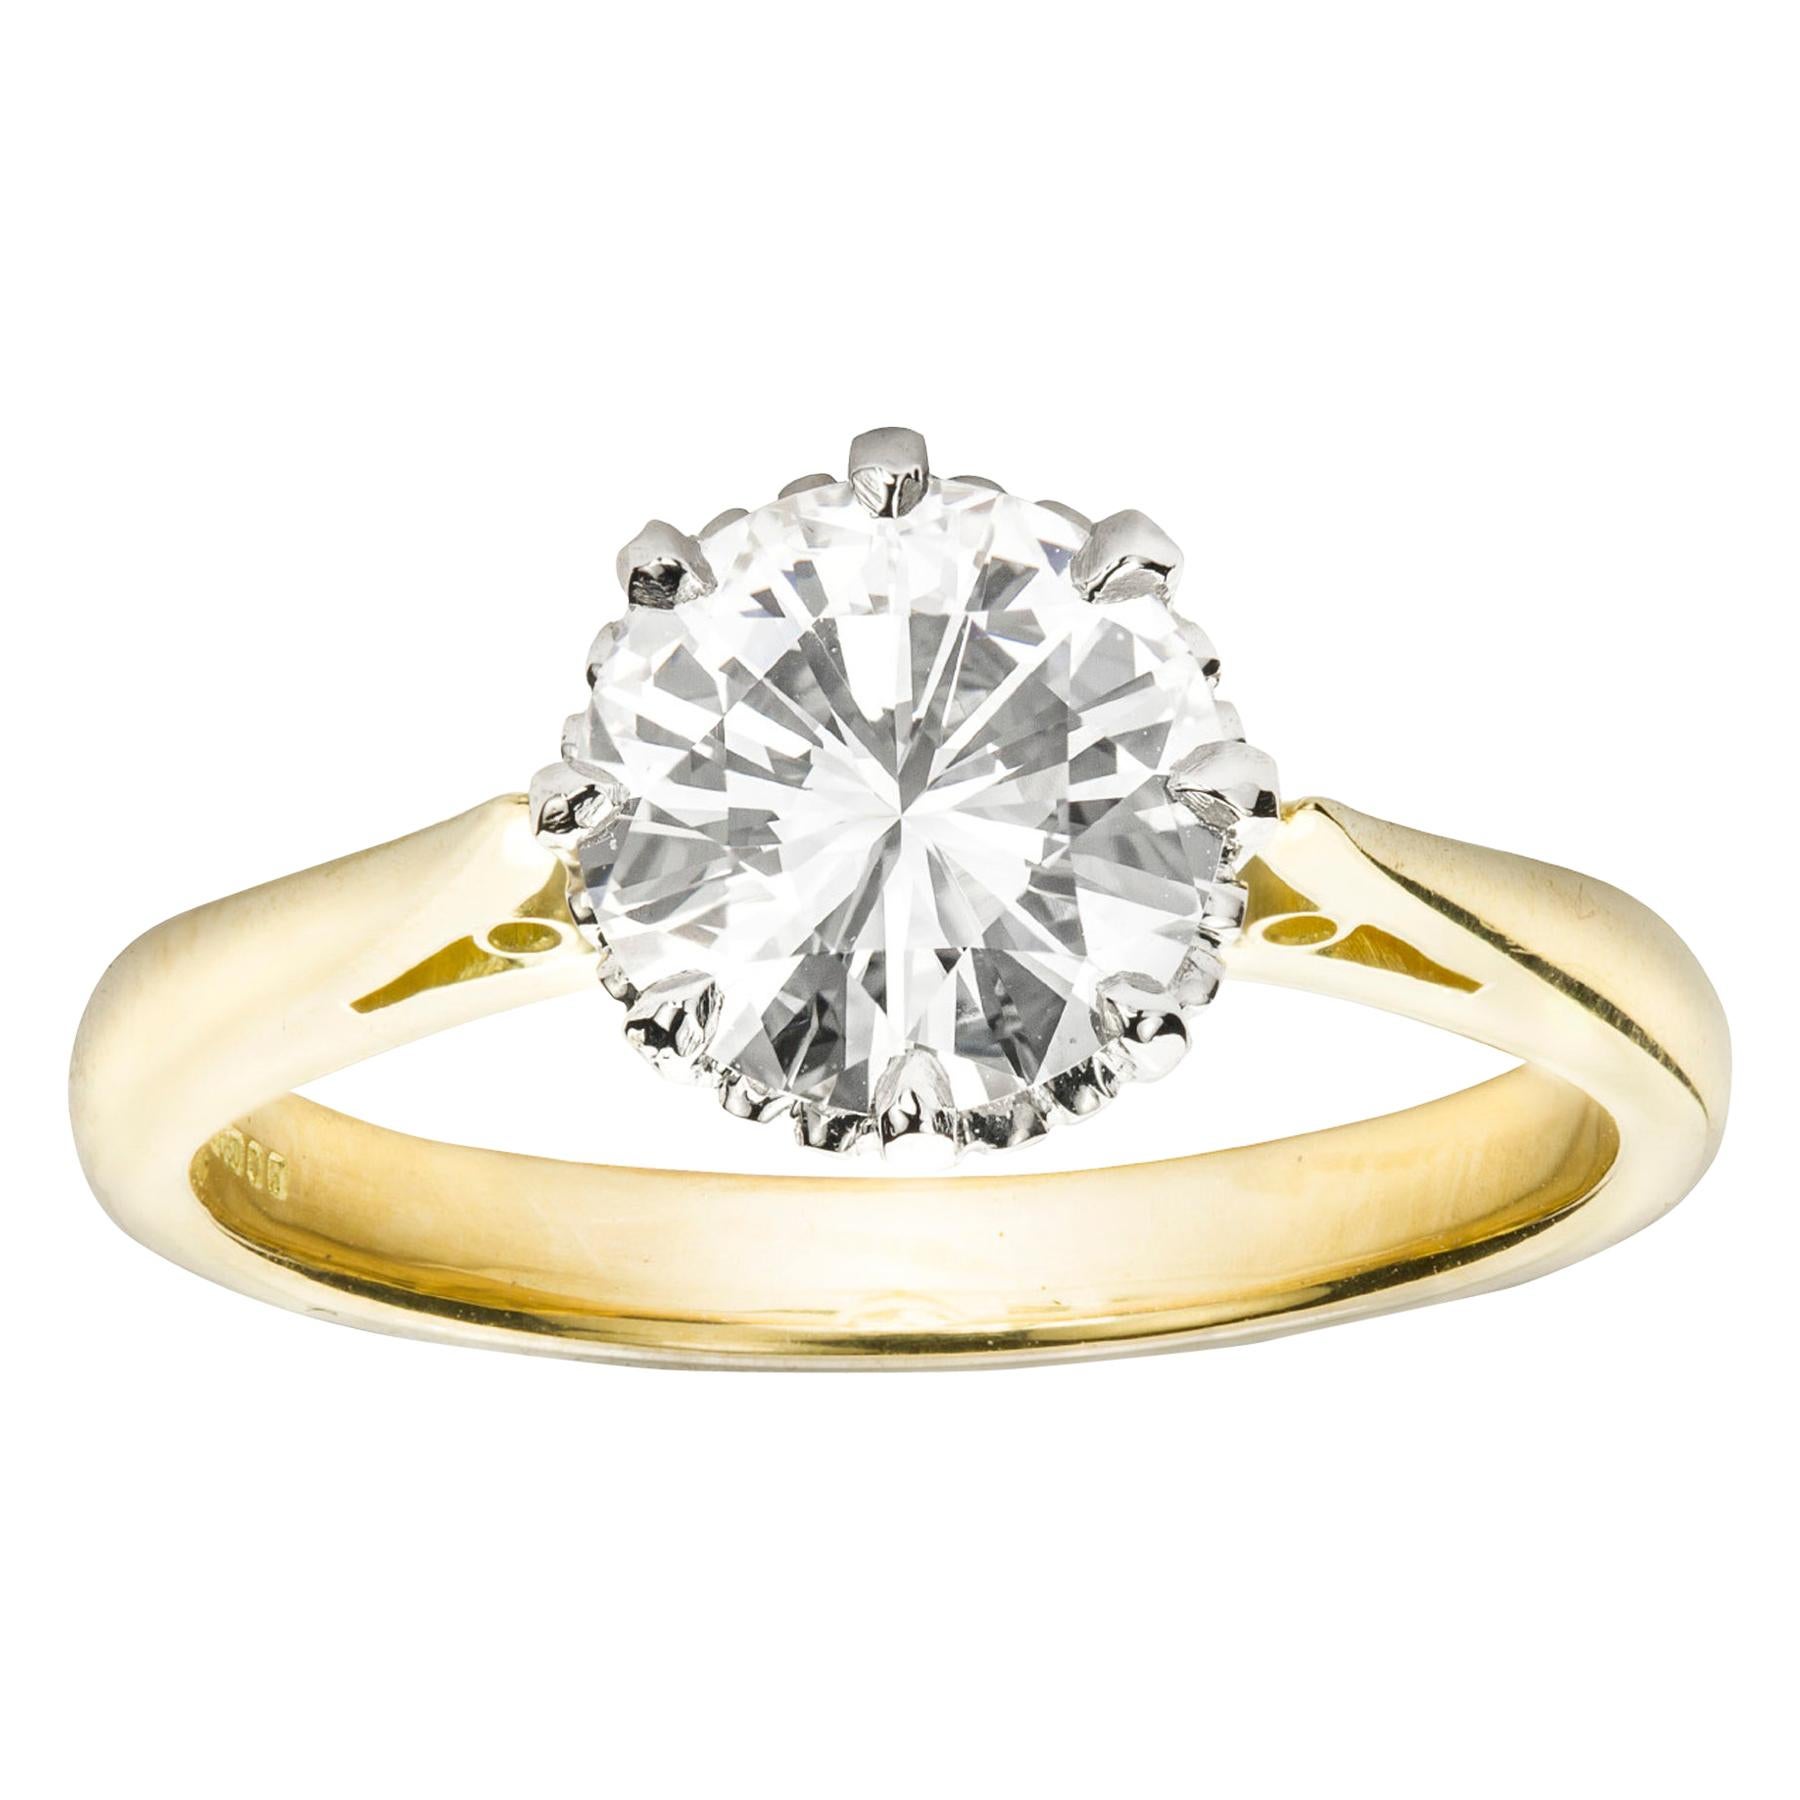 GIA Certified 1.26 Carat Diamond Solitaire Ring